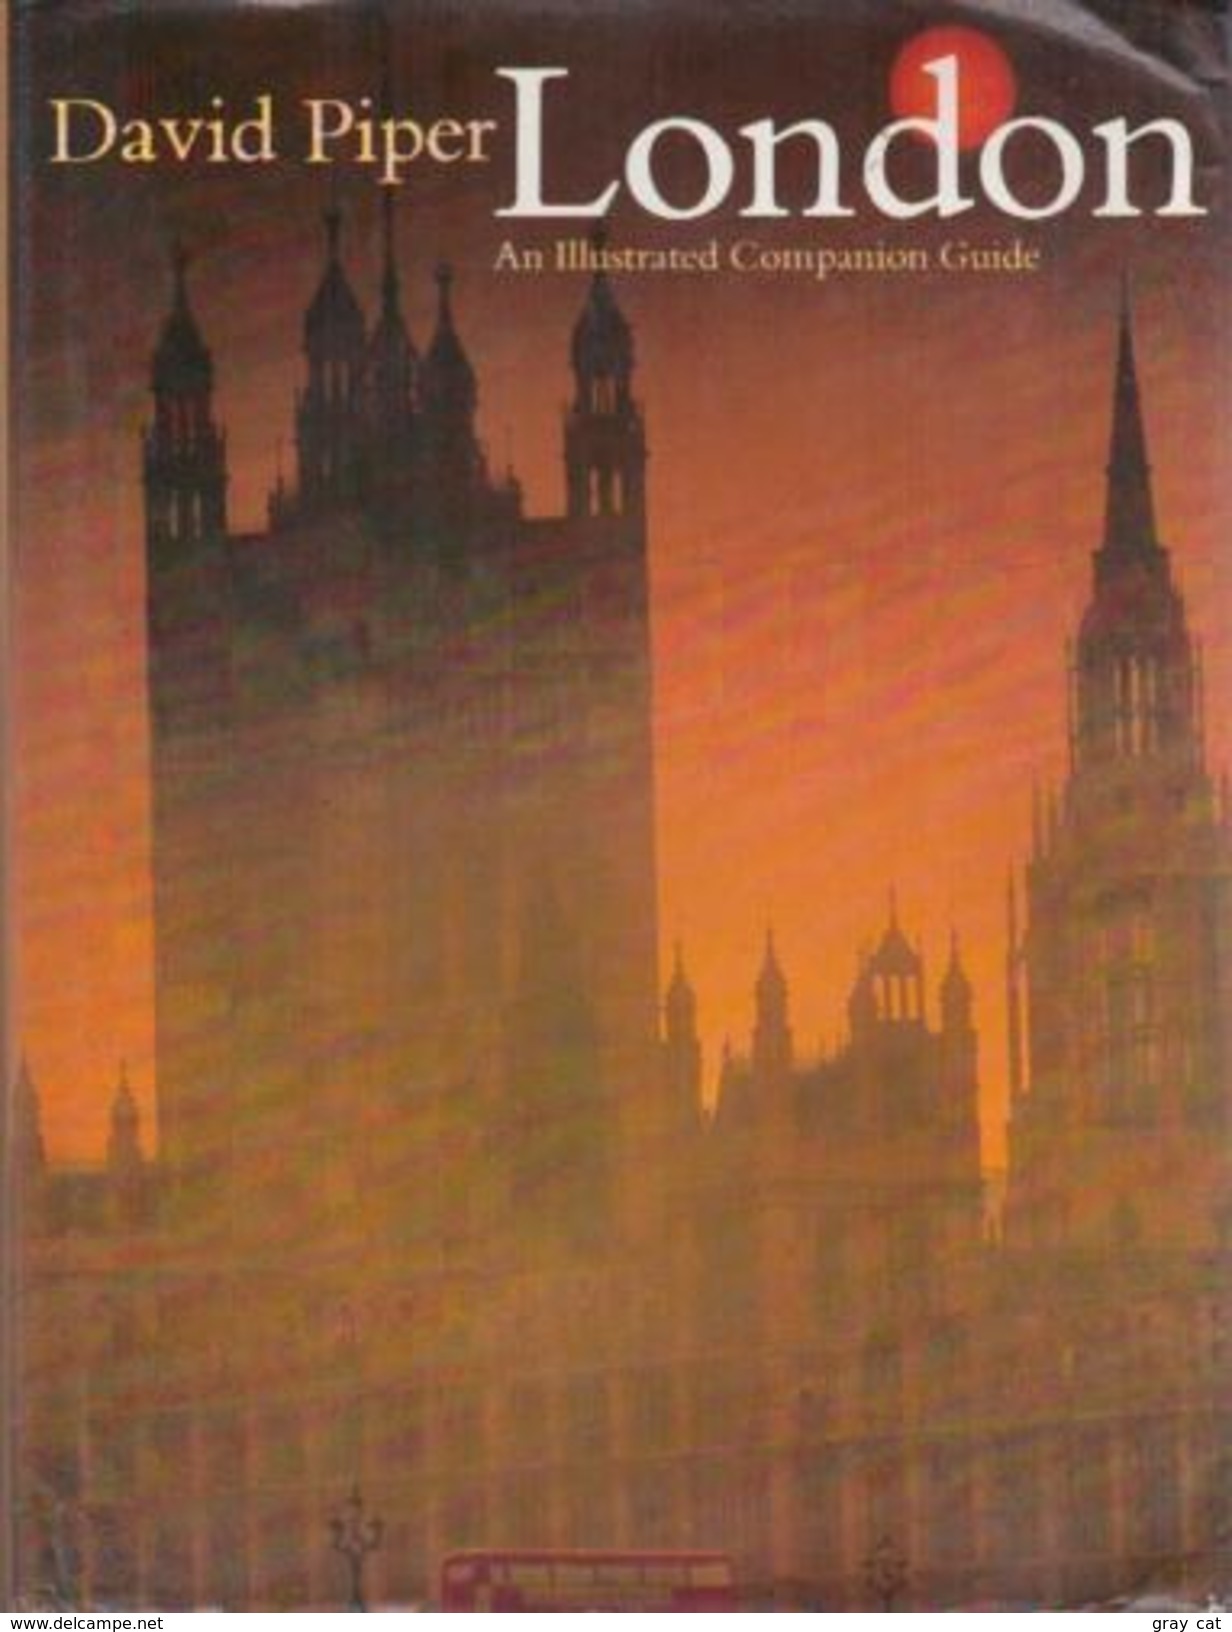 London An Illustrated Companion Guide By Piper, David (ISBN 9780002162876) - Reisen